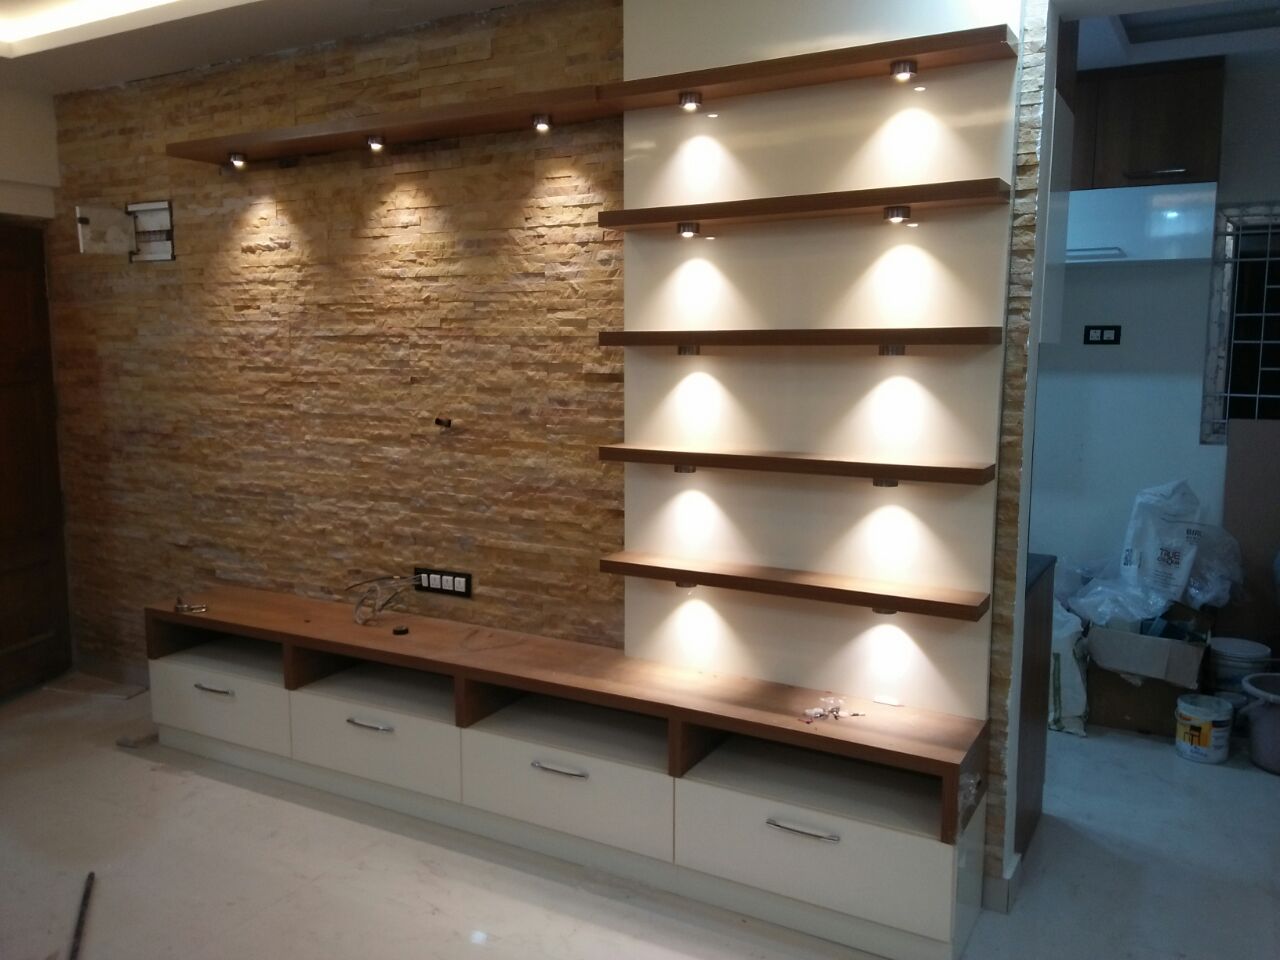 beautiful-affordable-lowest-price-wardrobe-designs-in-delhi-new-delhi-largest-dealers-manufacturers-of-wardrobes-in-delhi-india